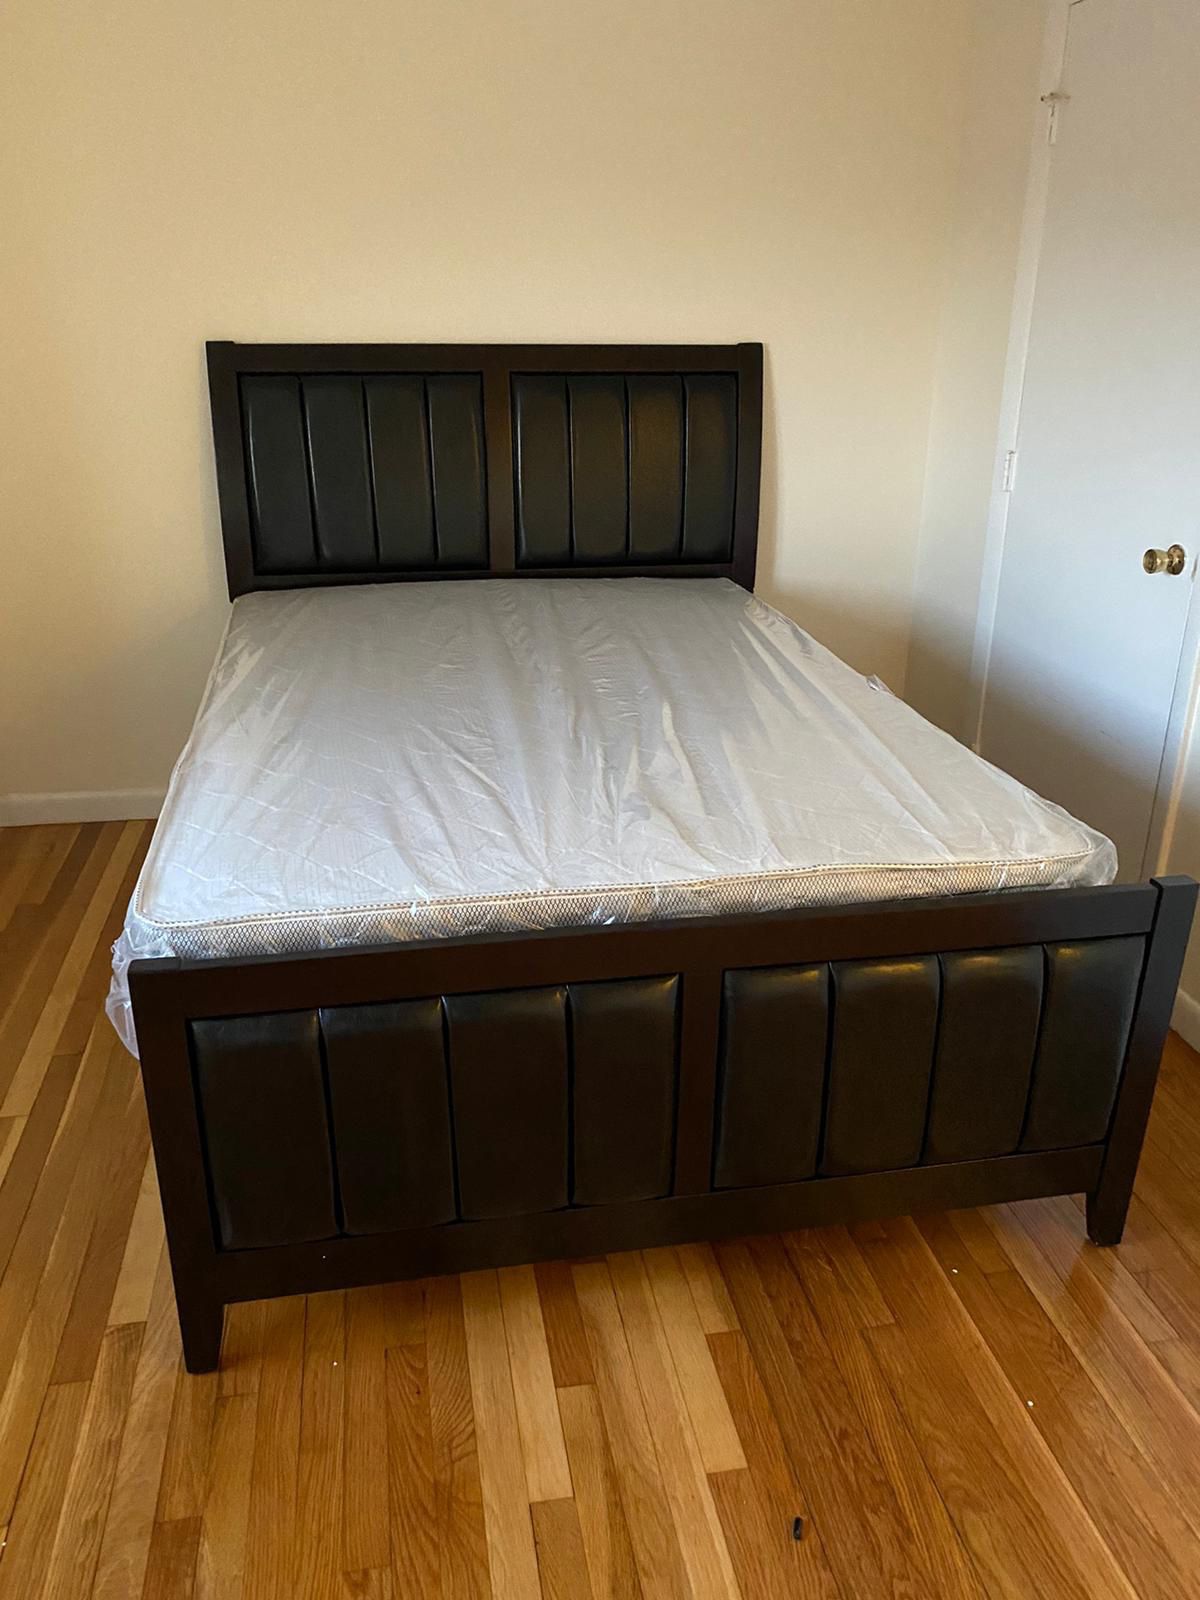 Brand new queen size bed frame + new queen size orthopedic mattress double sided included